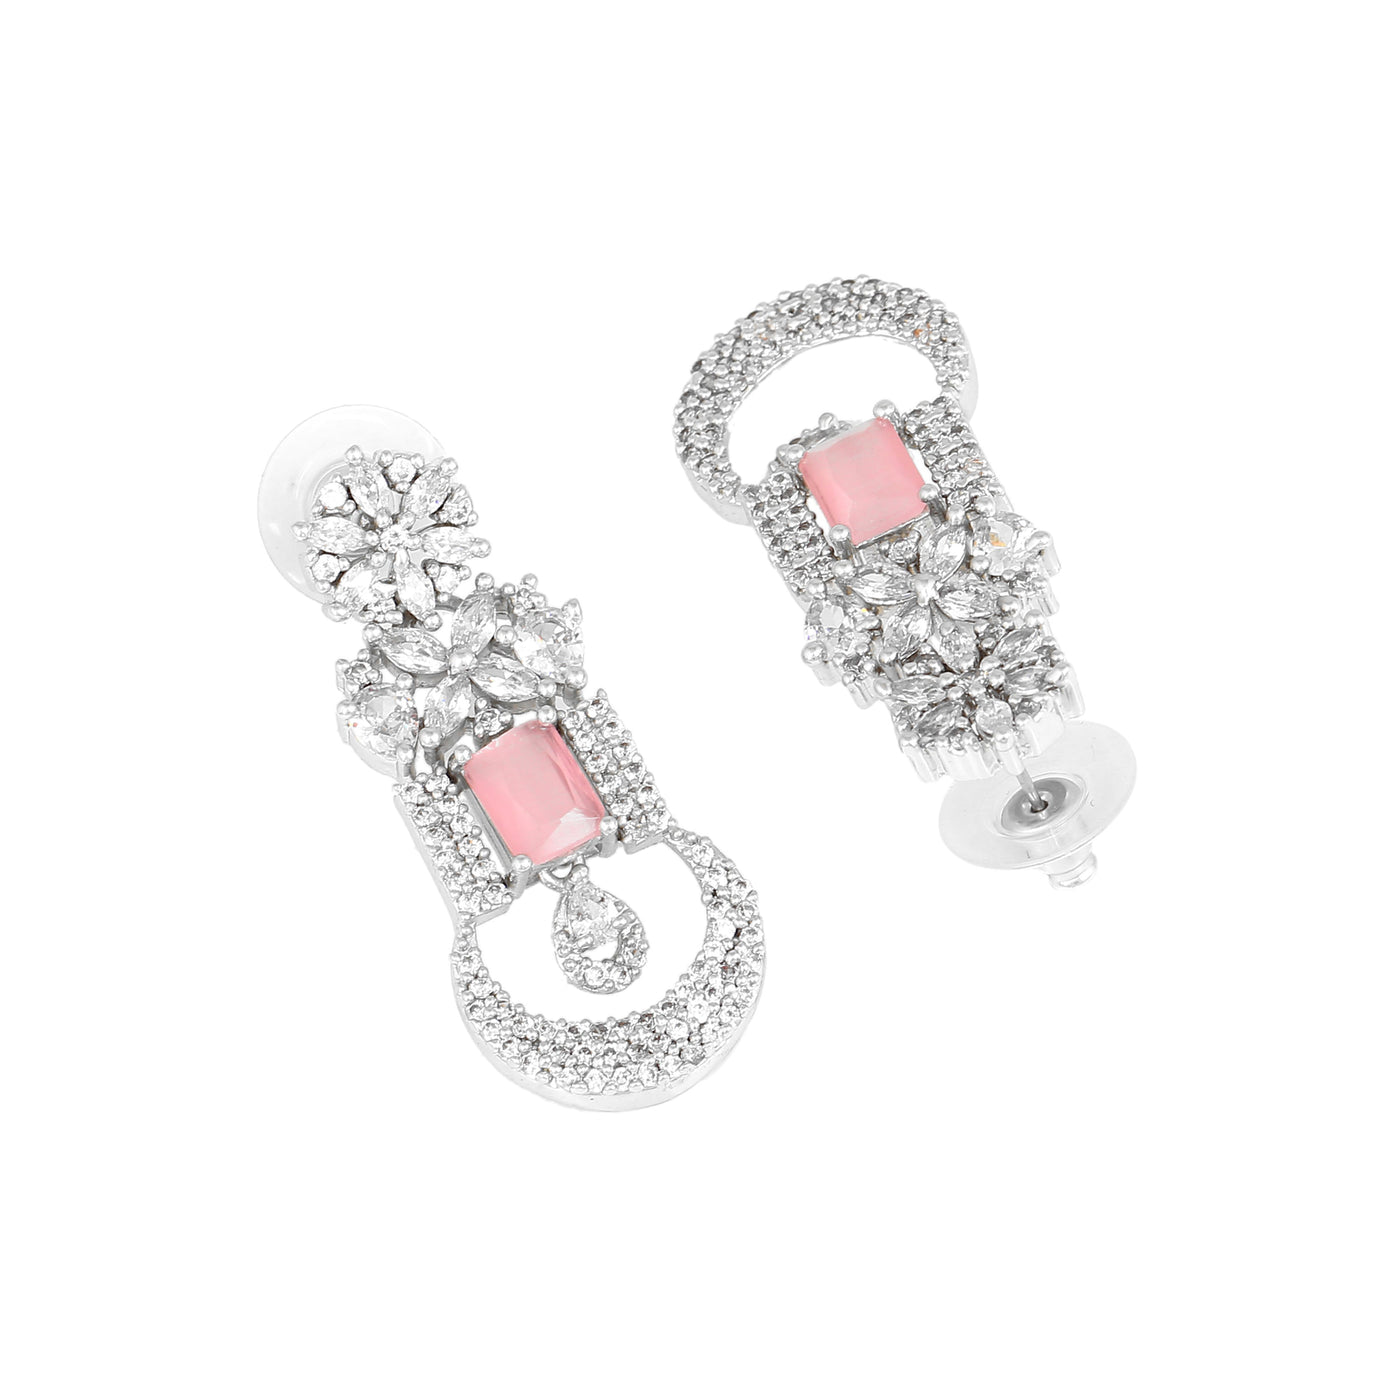 Estele Rhodium Plated CZ Gorgeous Designer Drop Earrings with Mint Pink Crystals for Women